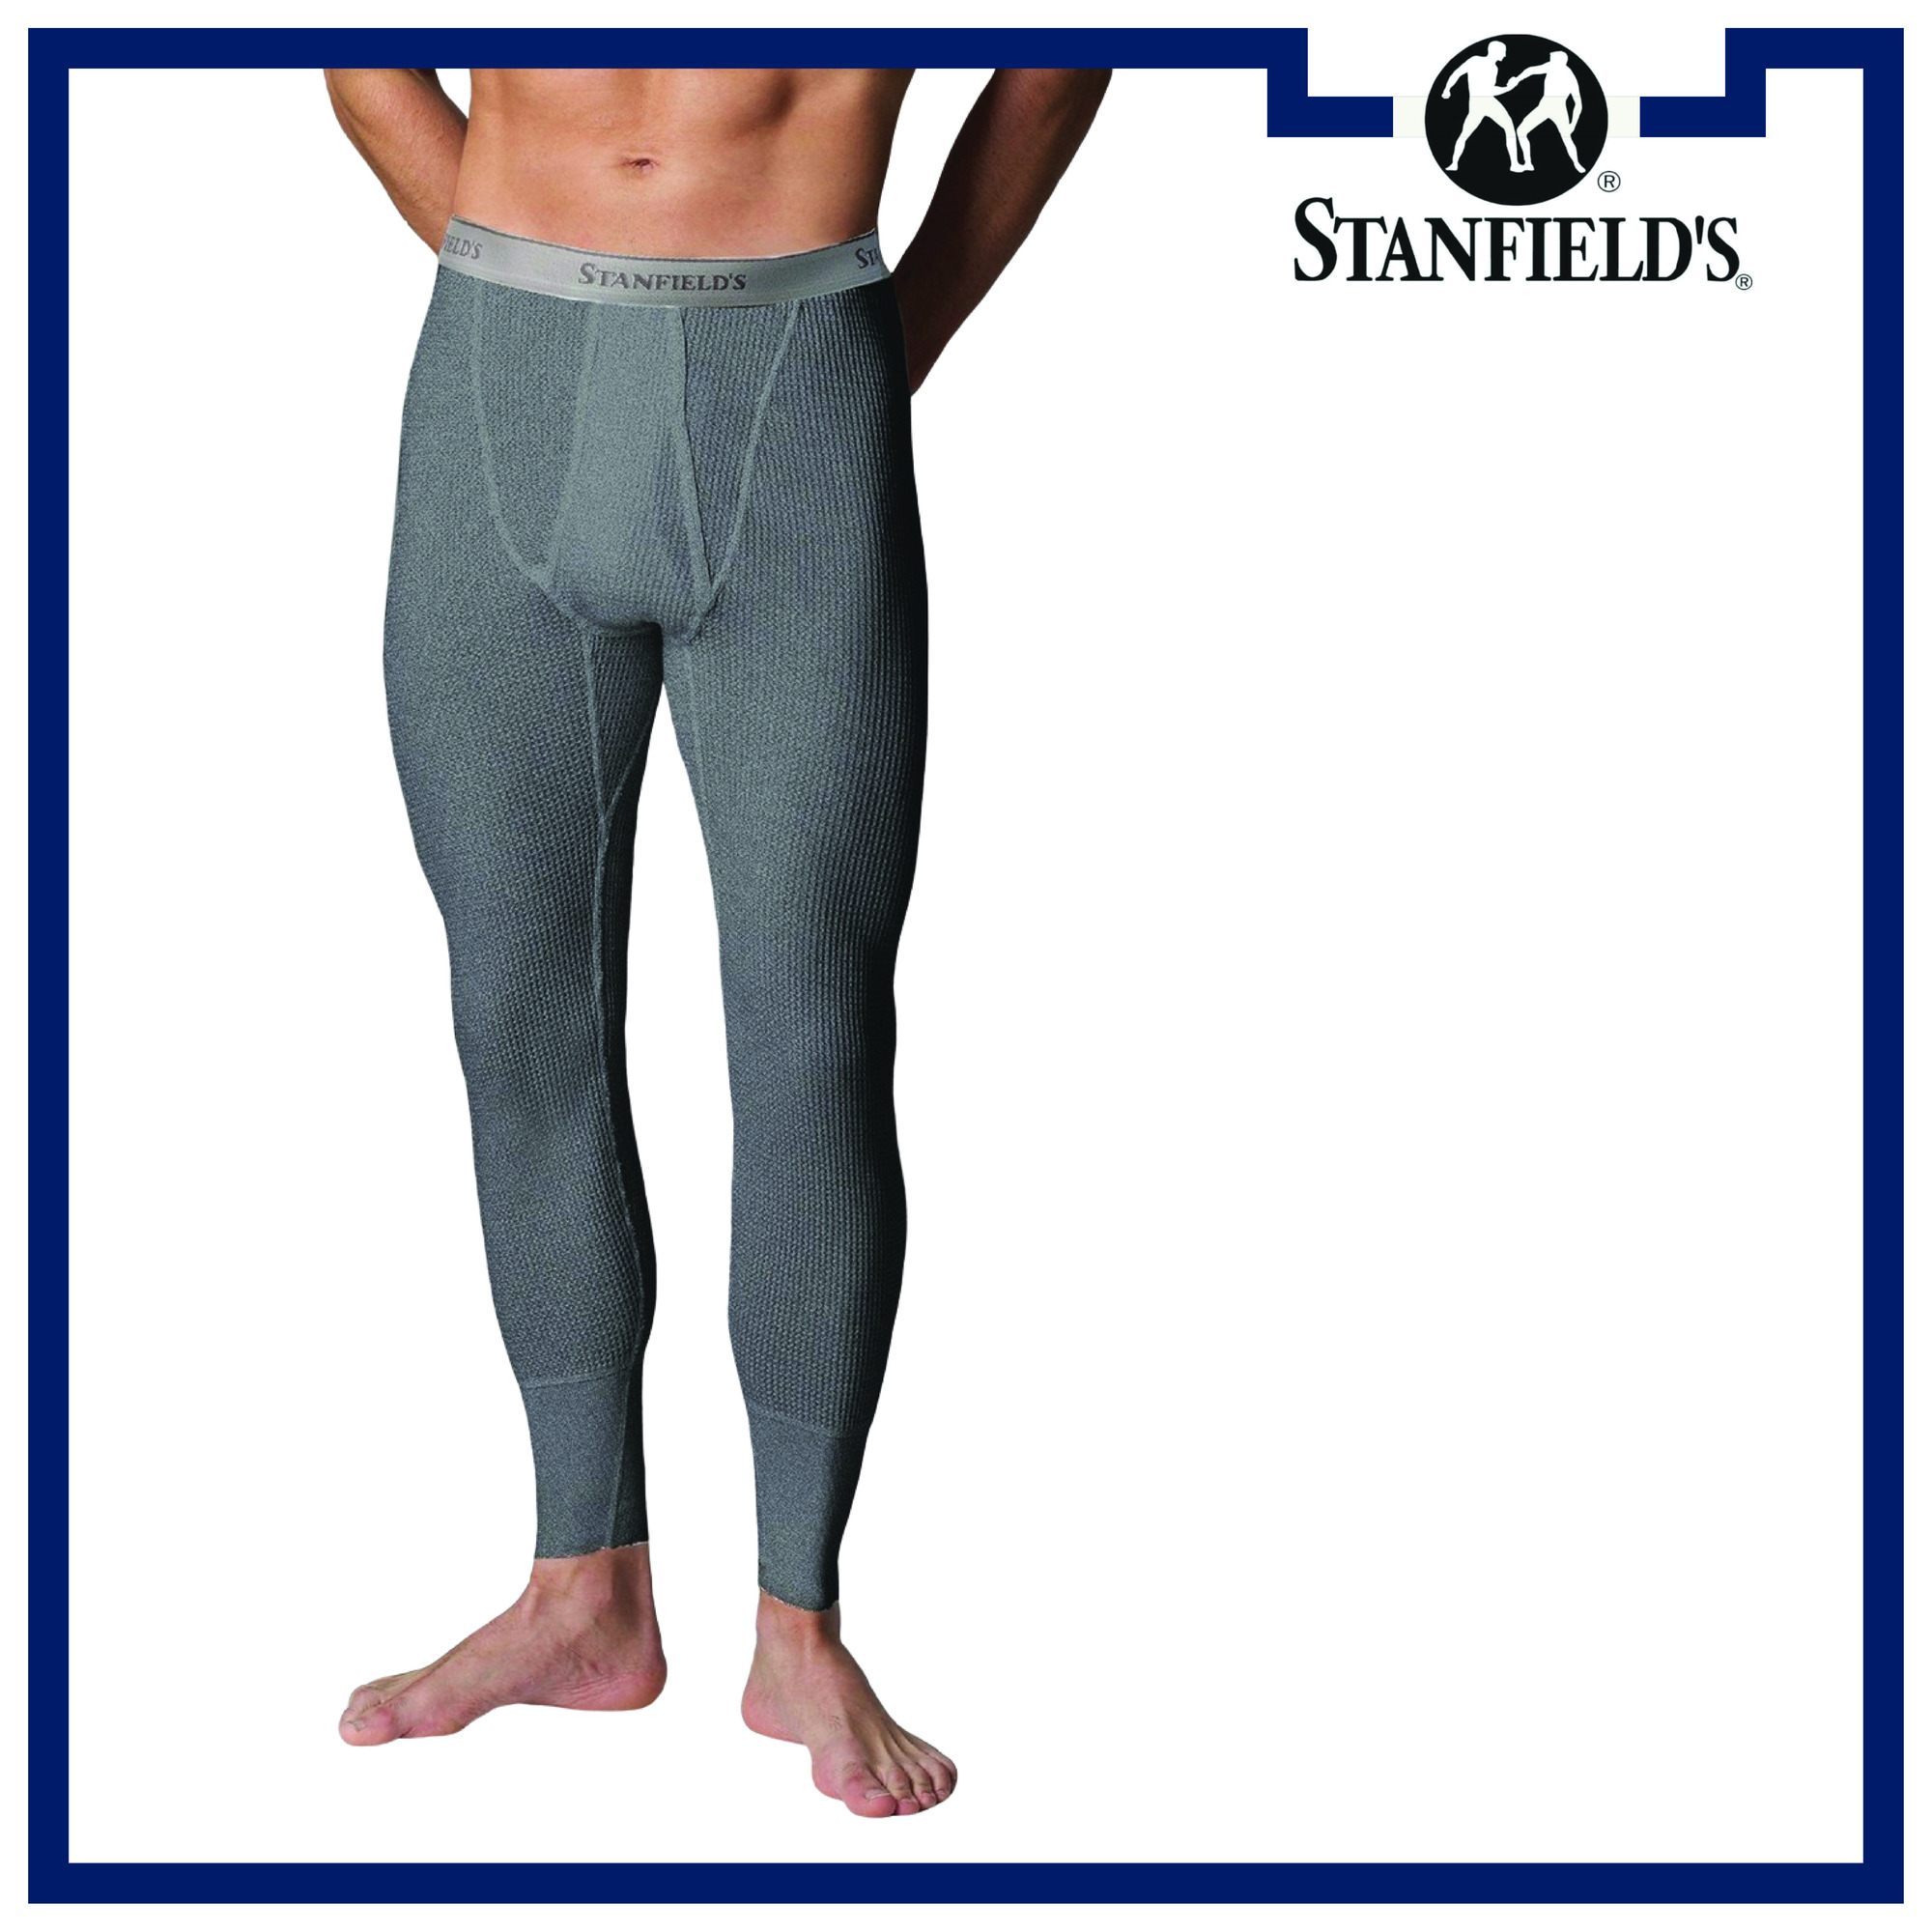 Stanfield's, Men's Thermal Waffle Knit Long Johns, Size S, Color CHARCOAL  MIX, Model# 6622-Charcoal Mix-S Northern Tool